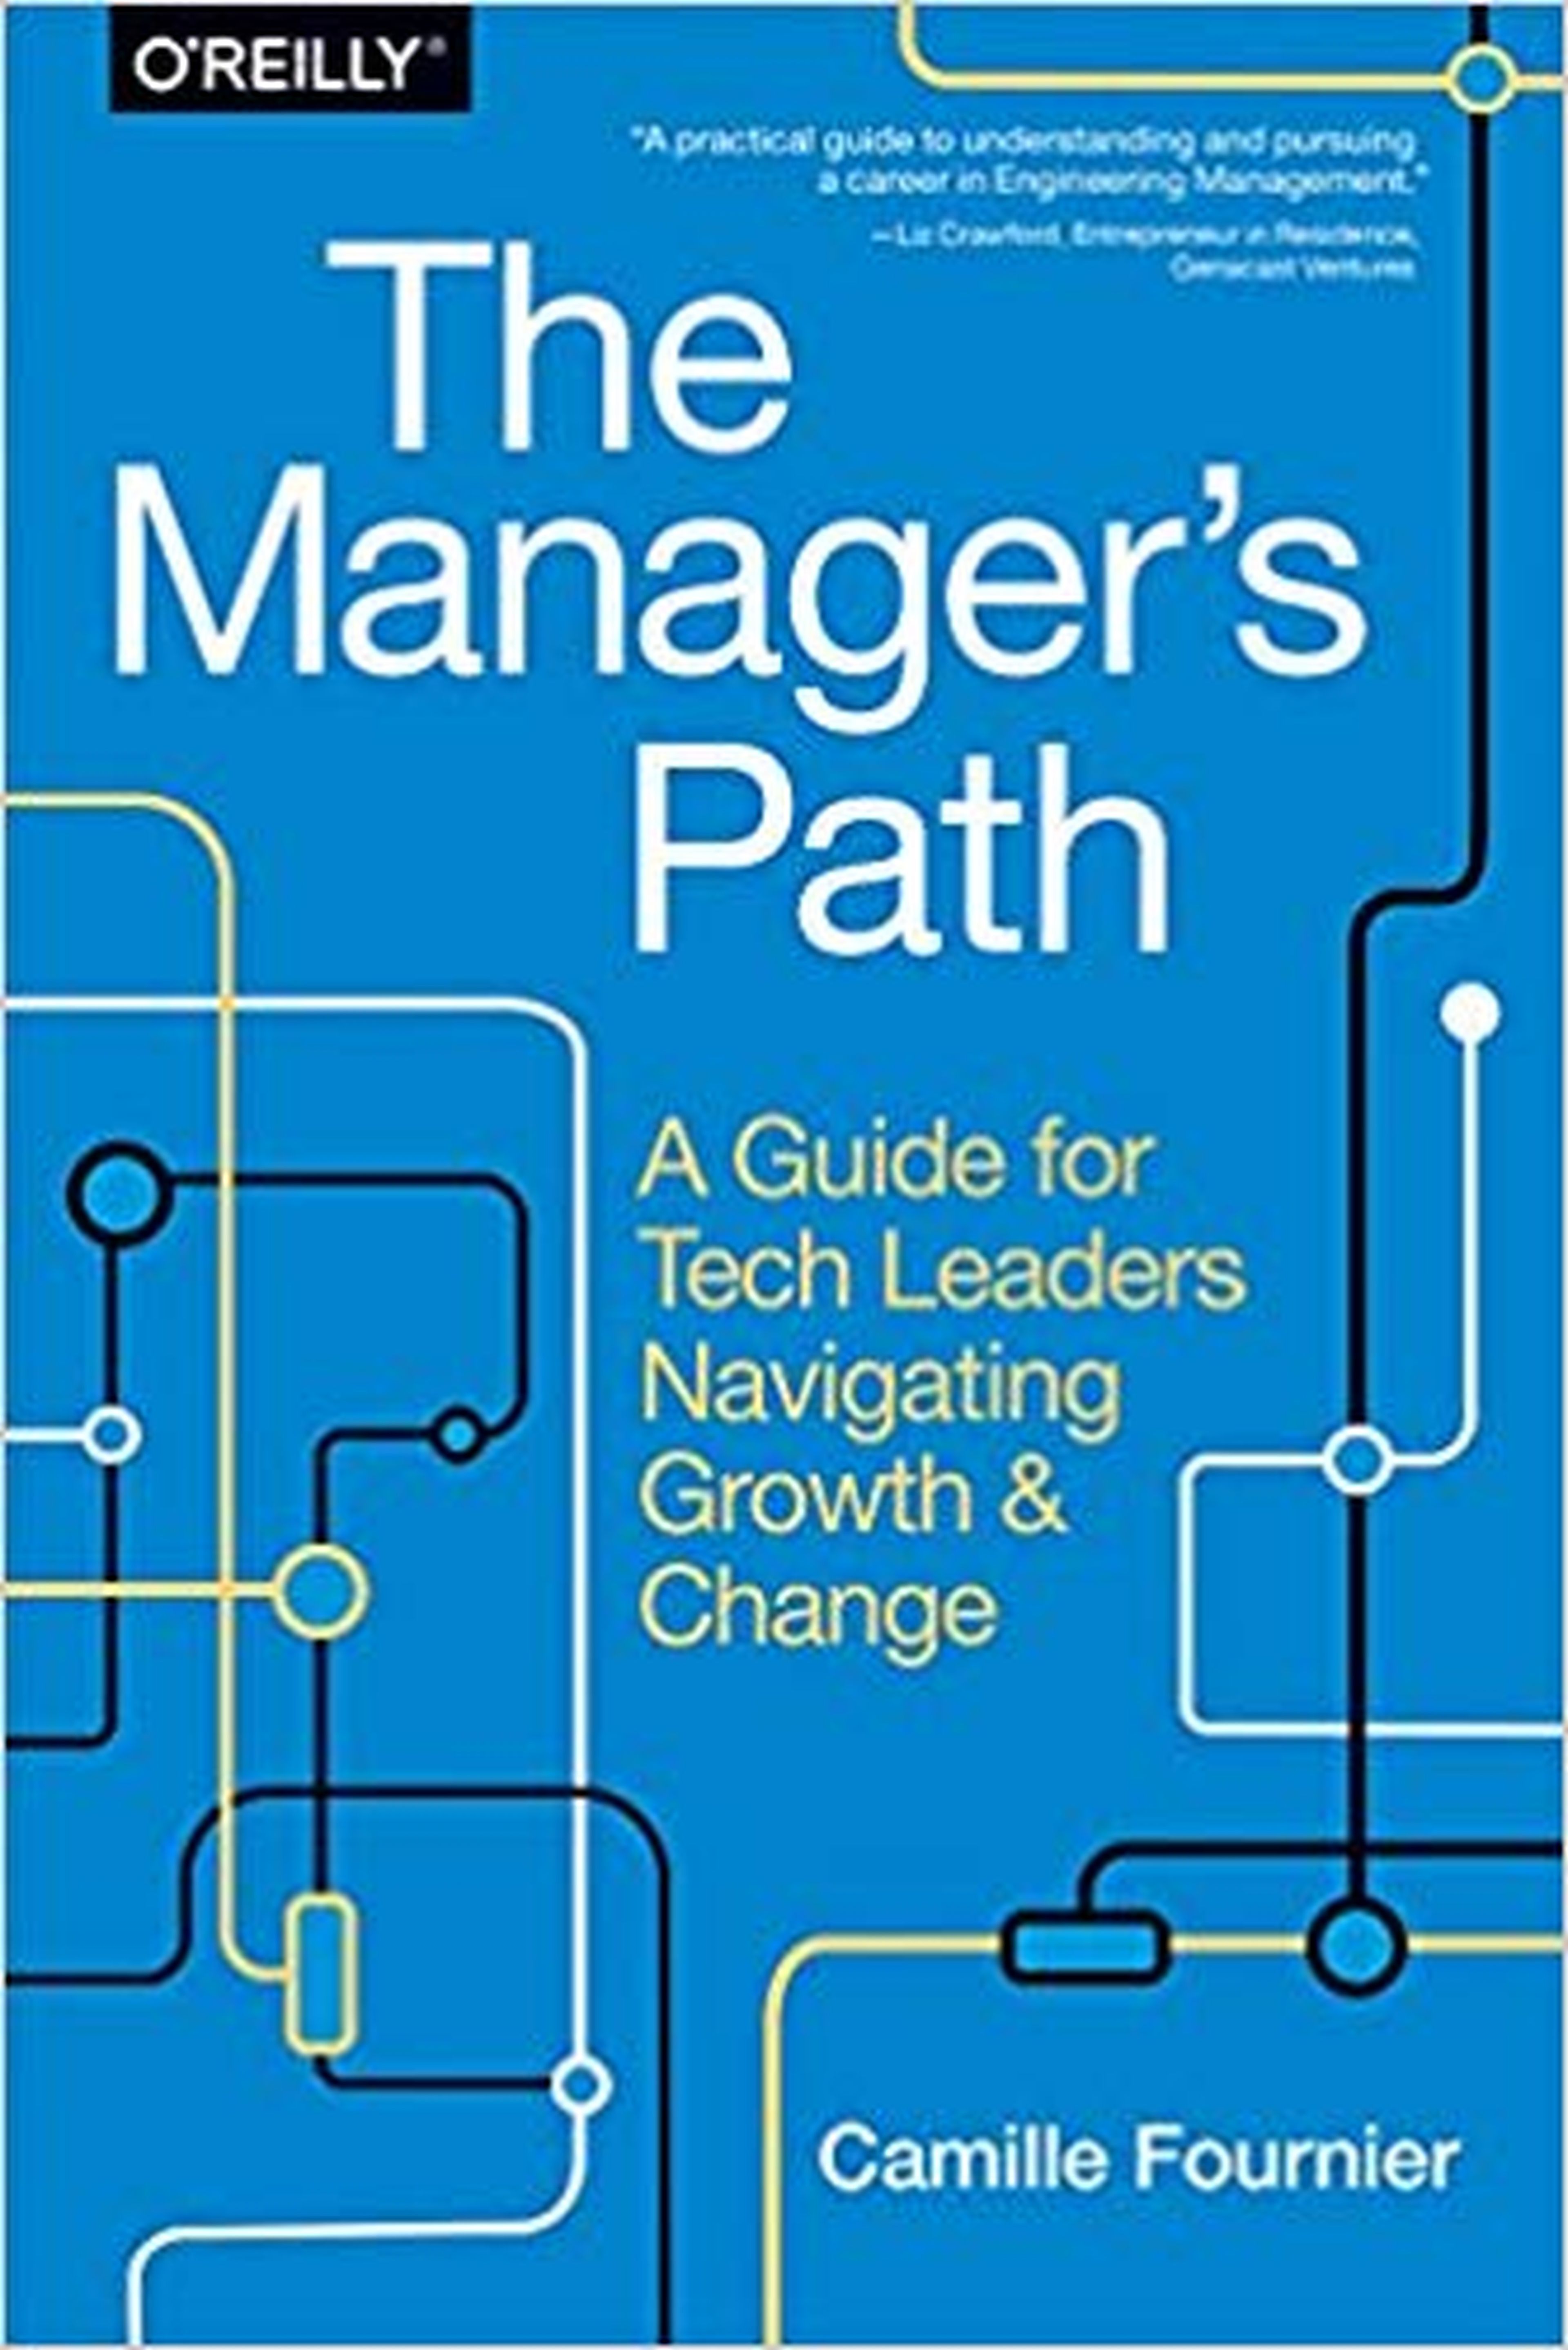 "The managers path: A Guide for Tech Leaders Navigating Growth and Change" - Camille Fournier